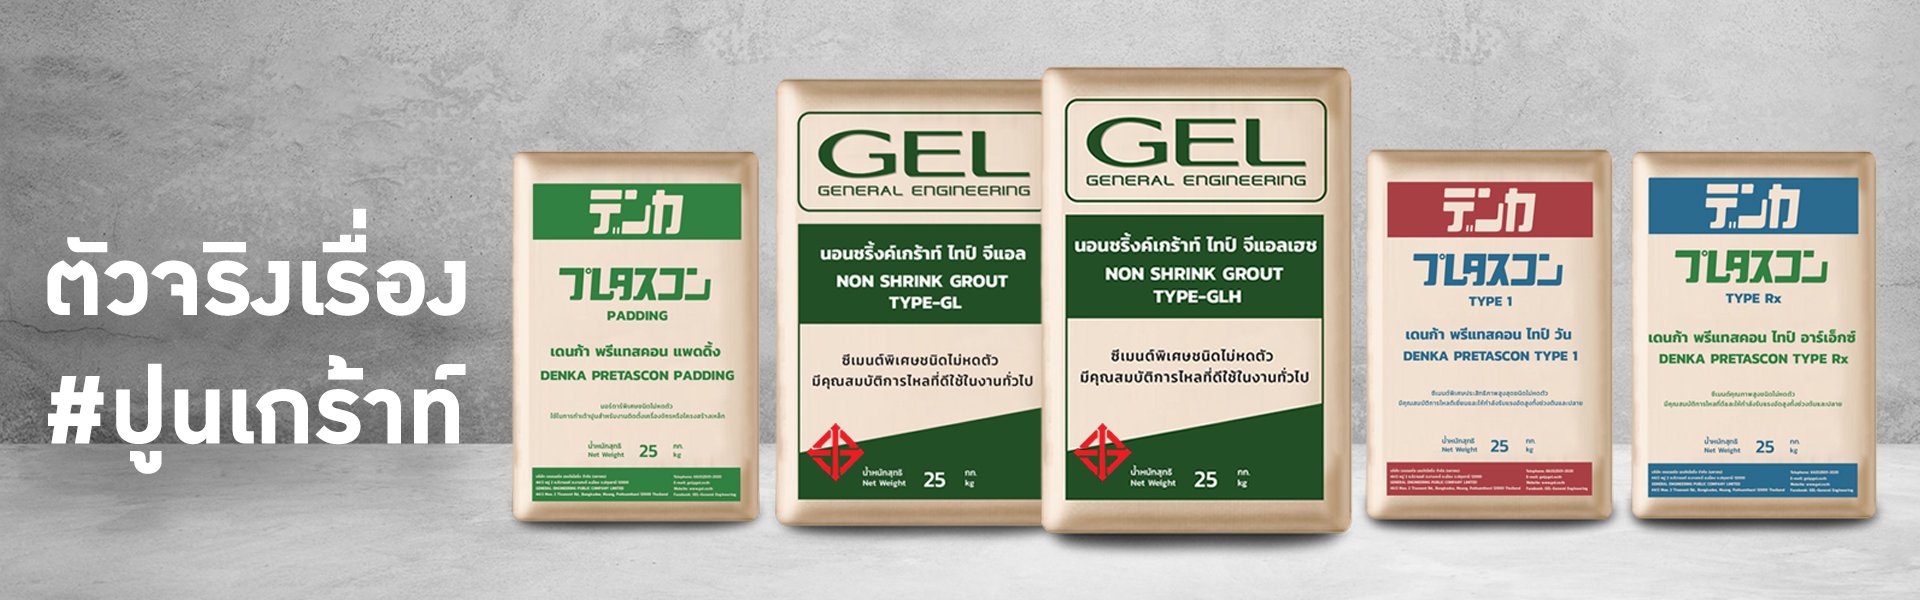 GEL Non-Shrink Grout